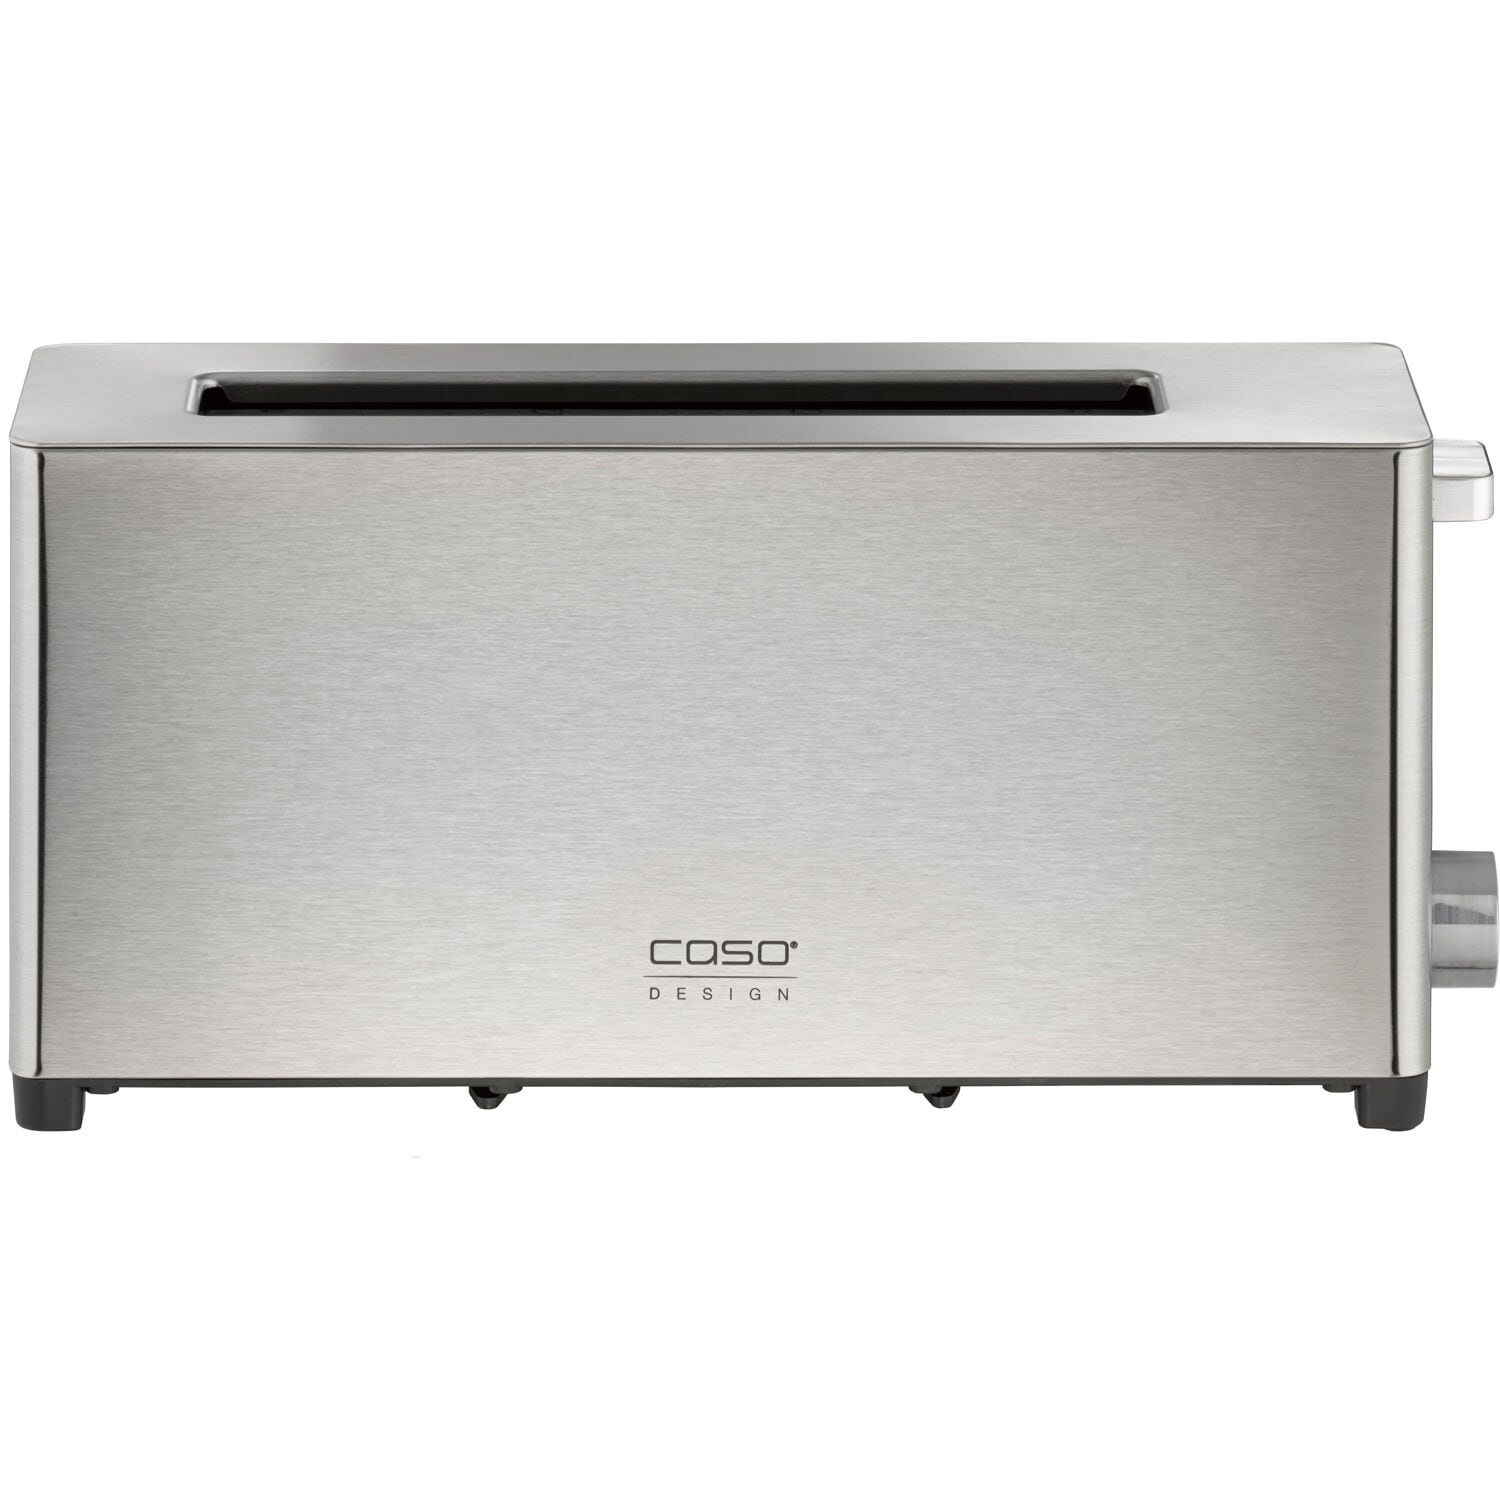 https://ak1.ostkcdn.com/images/products/is/images/direct/8286f5ad03e7539c8125422369ed0da19708e192/Two-Slice-Wide-Slot-Toaster%2C-Stainless-Steel.jpg